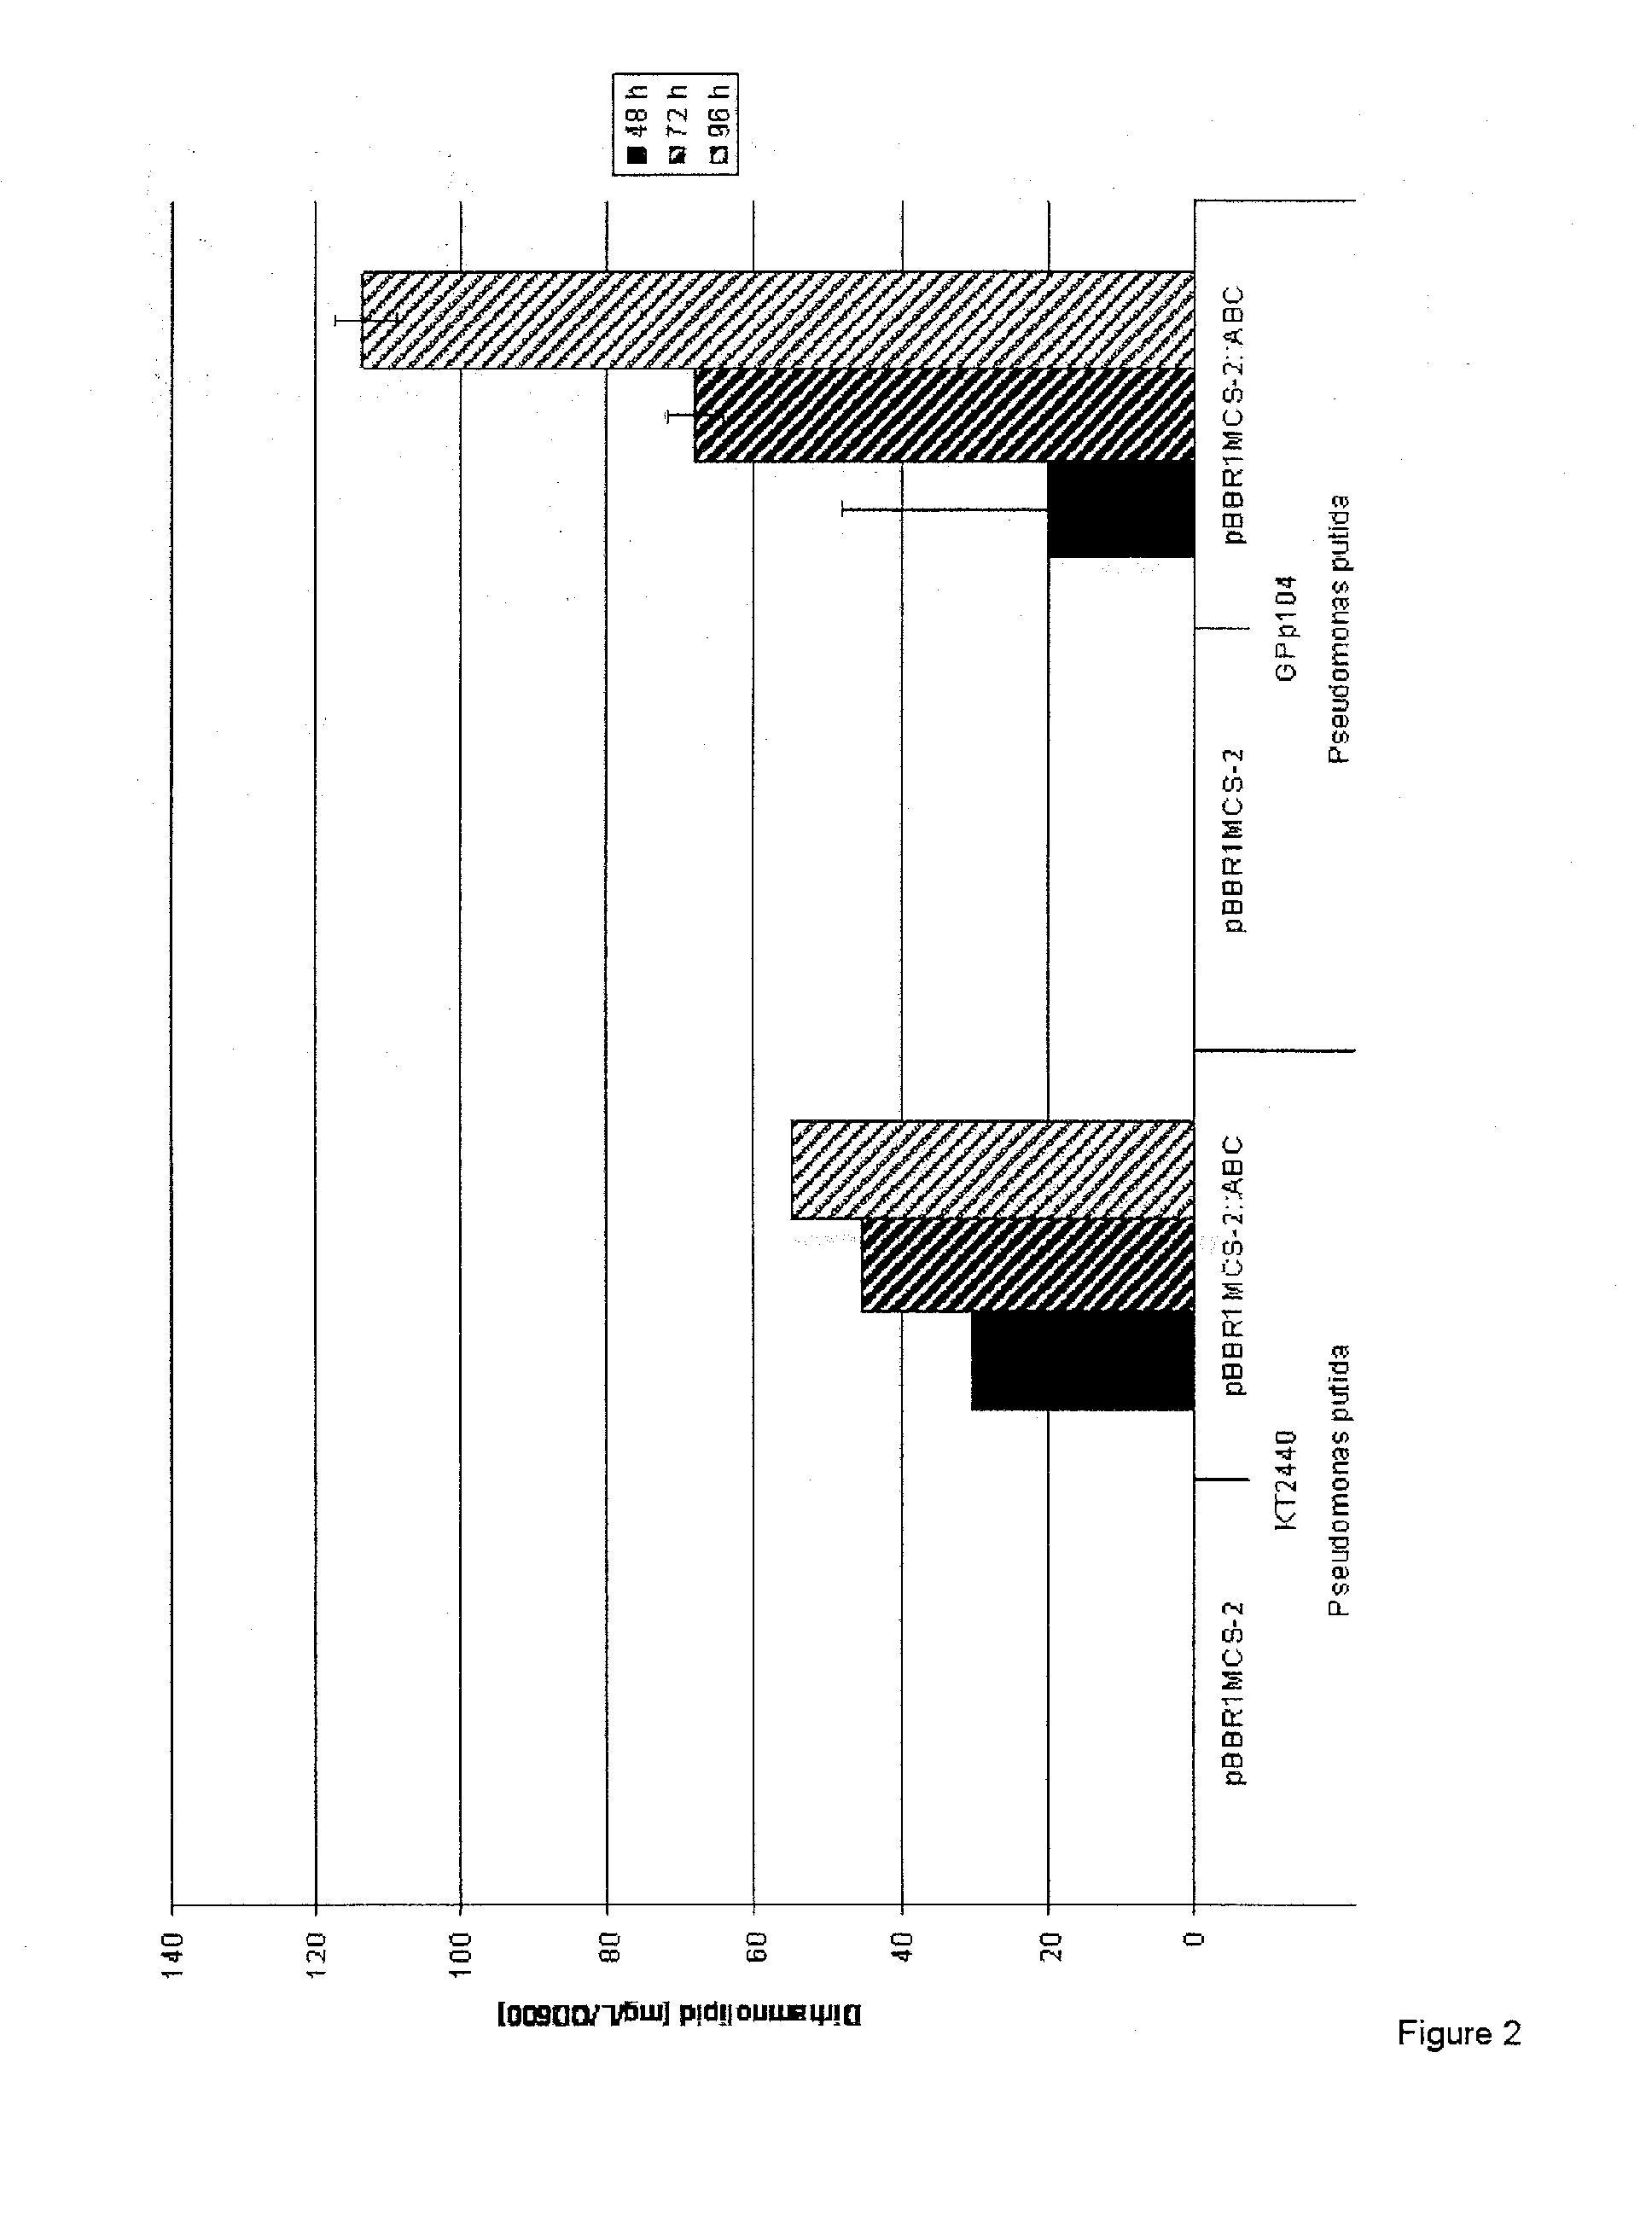 Cells and methods for producing rhamnolipids